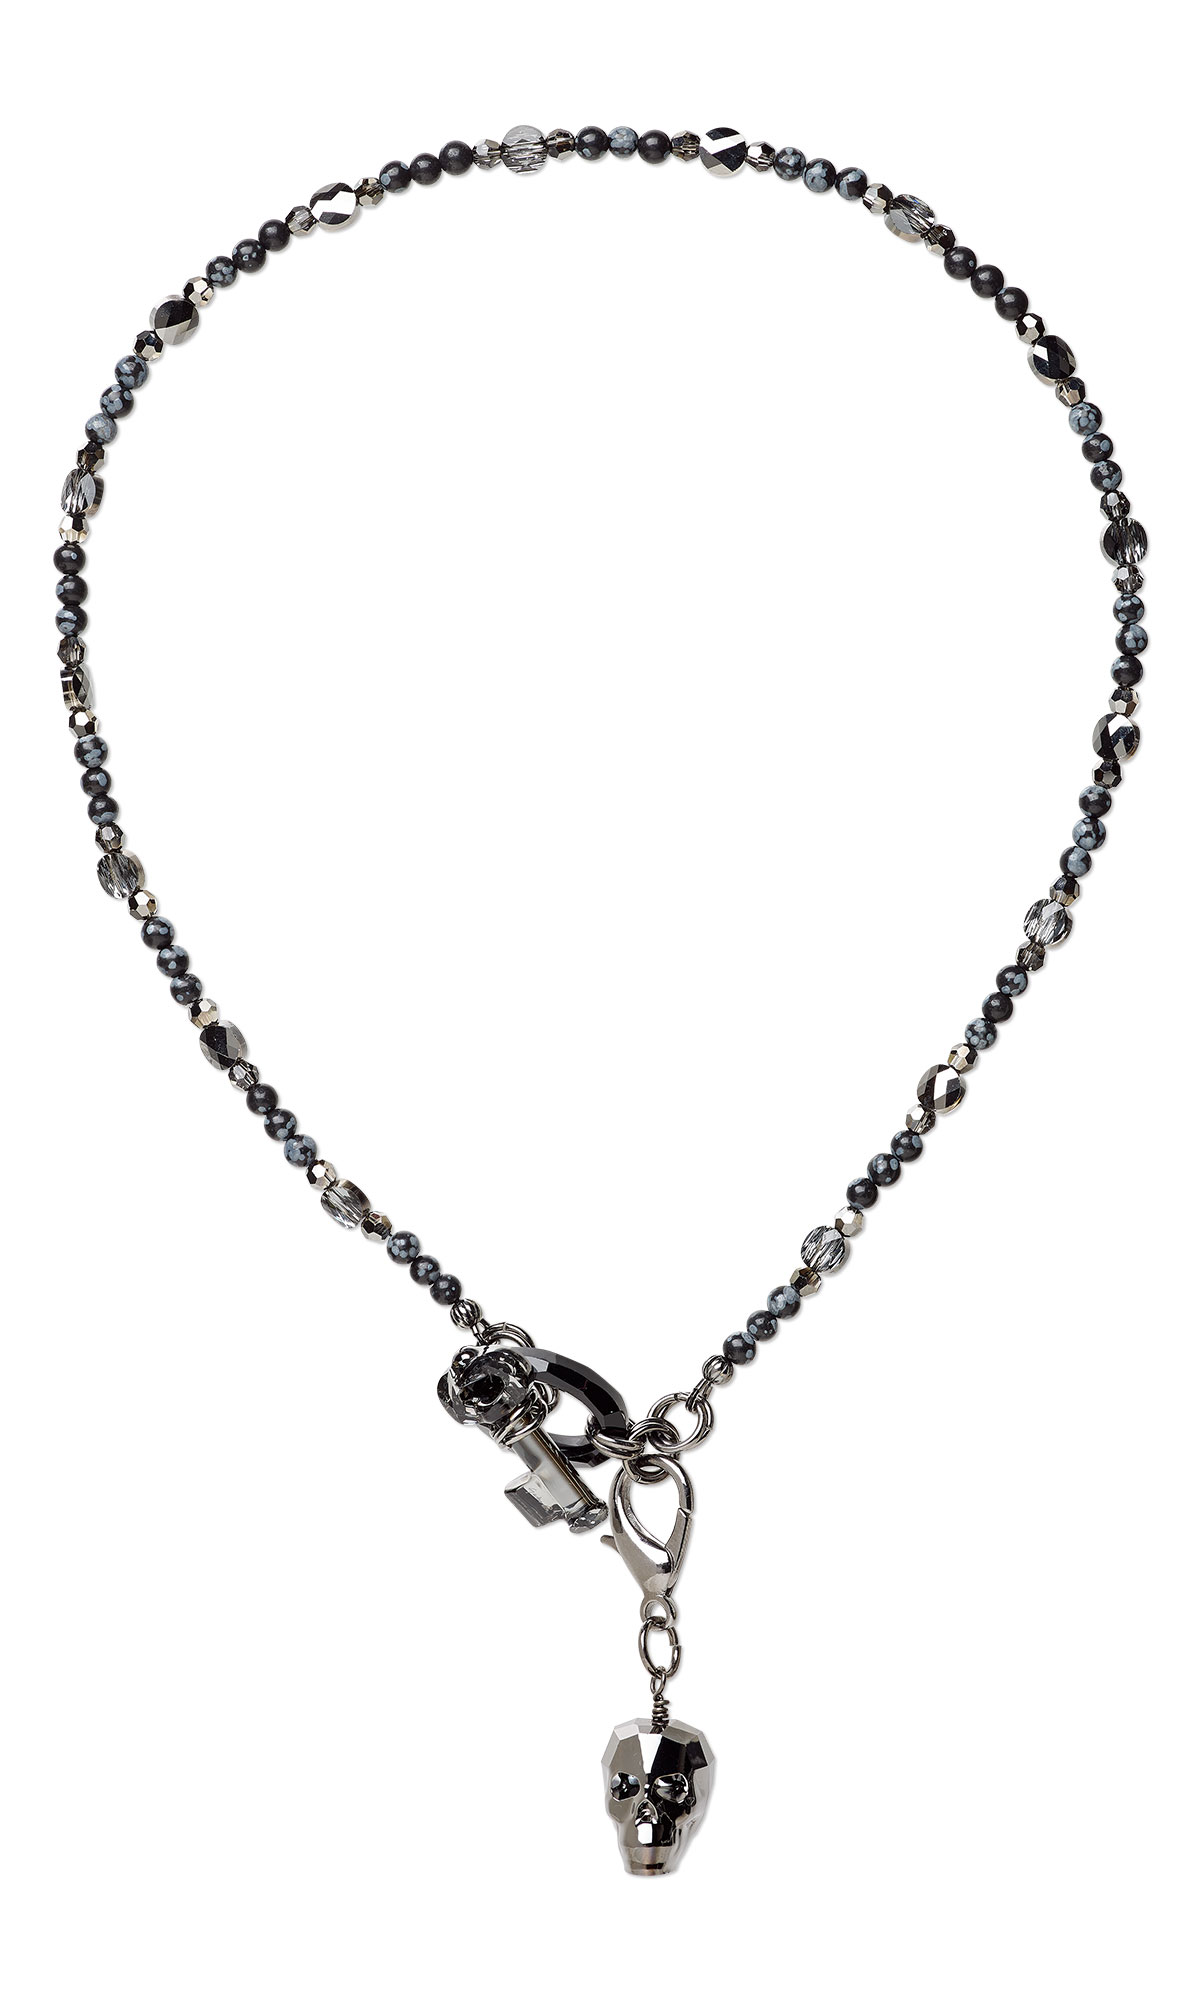 Jewelry Design - Single-Strand Necklace with Snowflake Obsidian ...